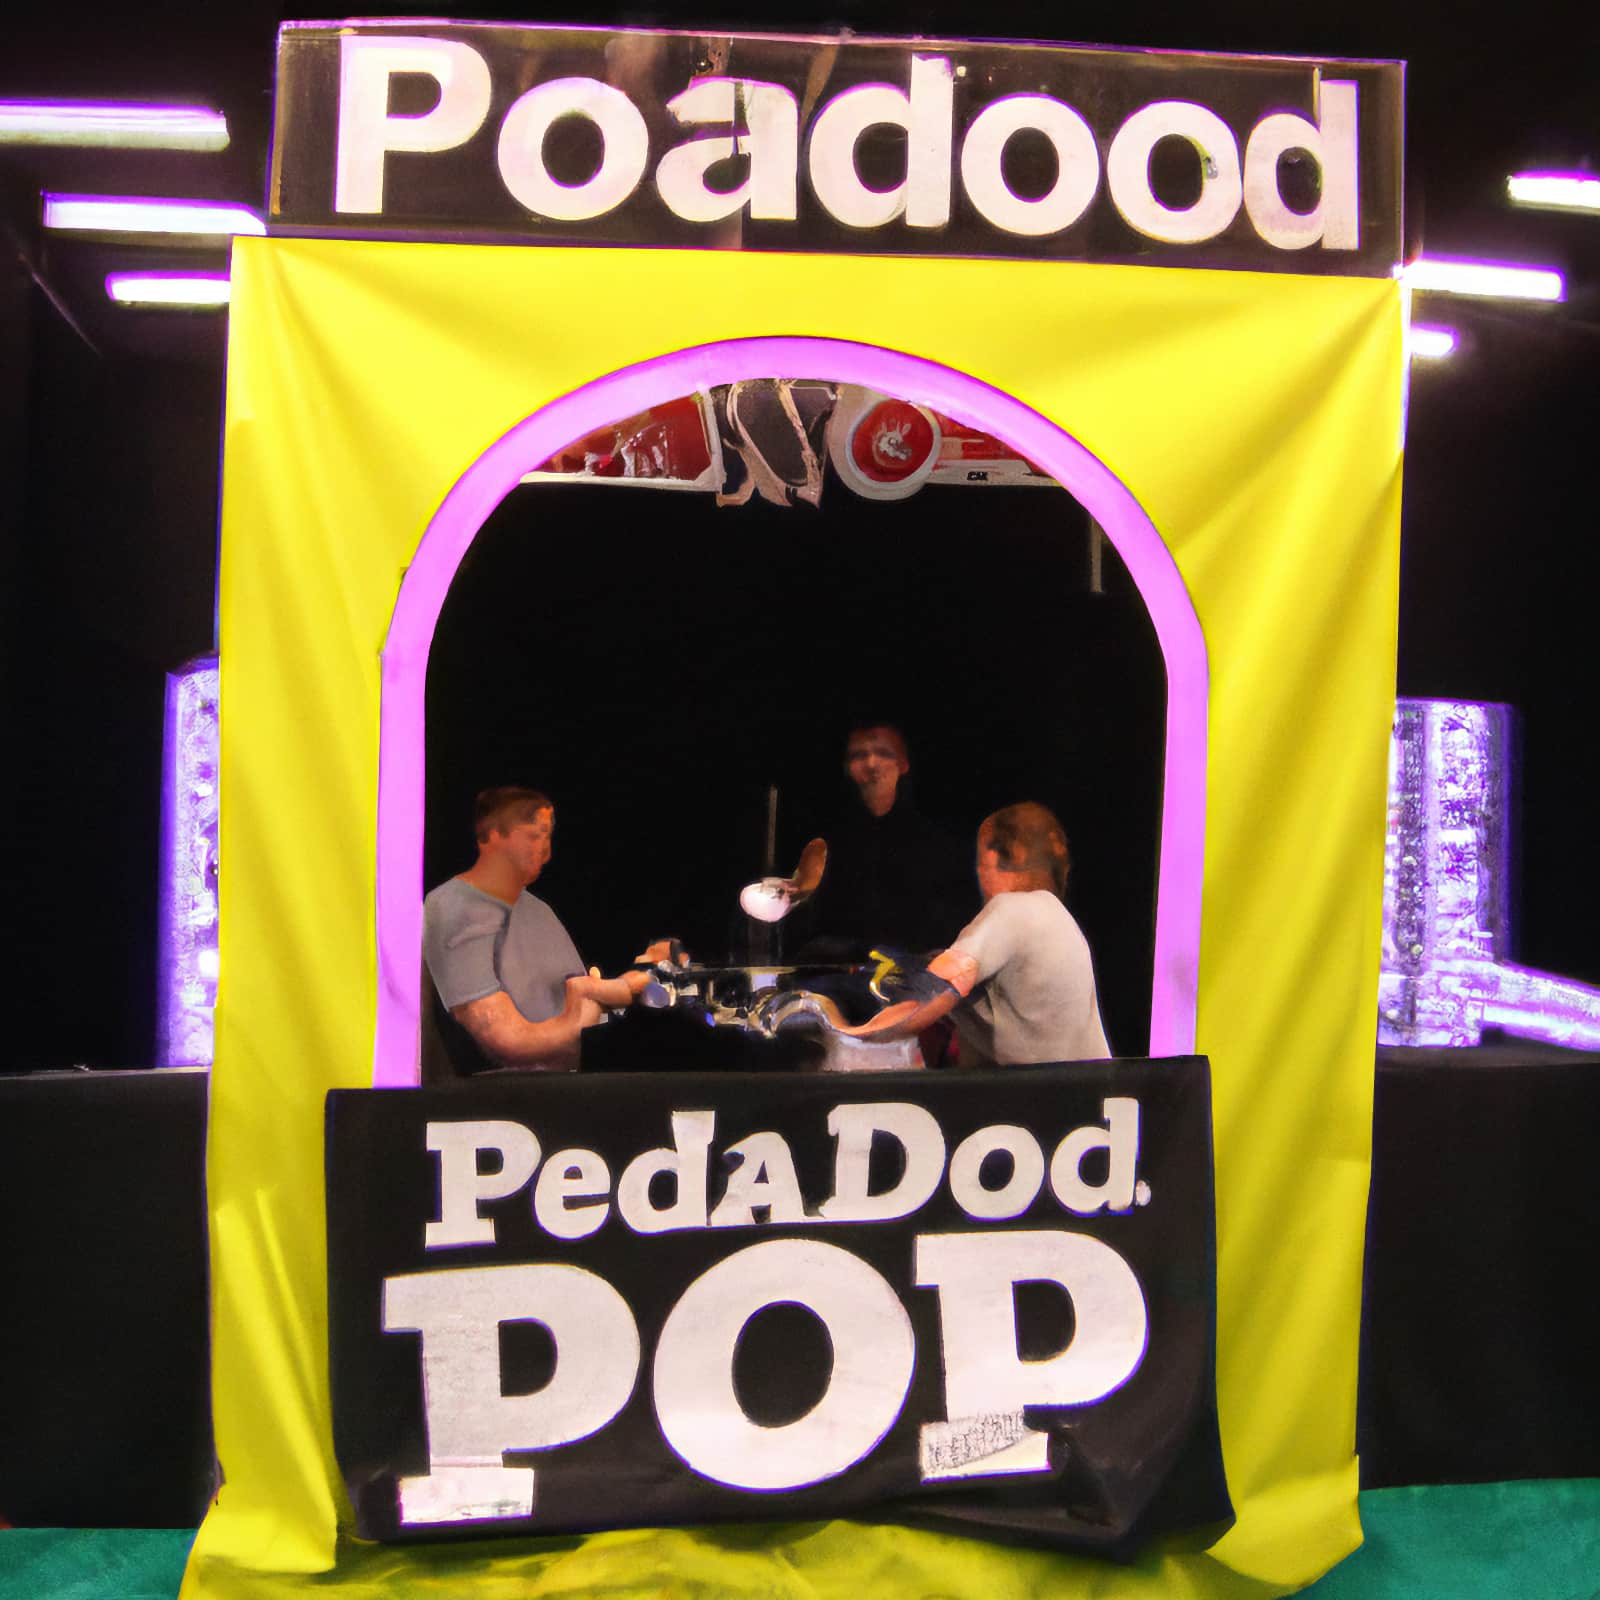 Podshow - or is it? This is AI's idea of podshow. PedadodPop? Ummm... (Future Tim in 2023)